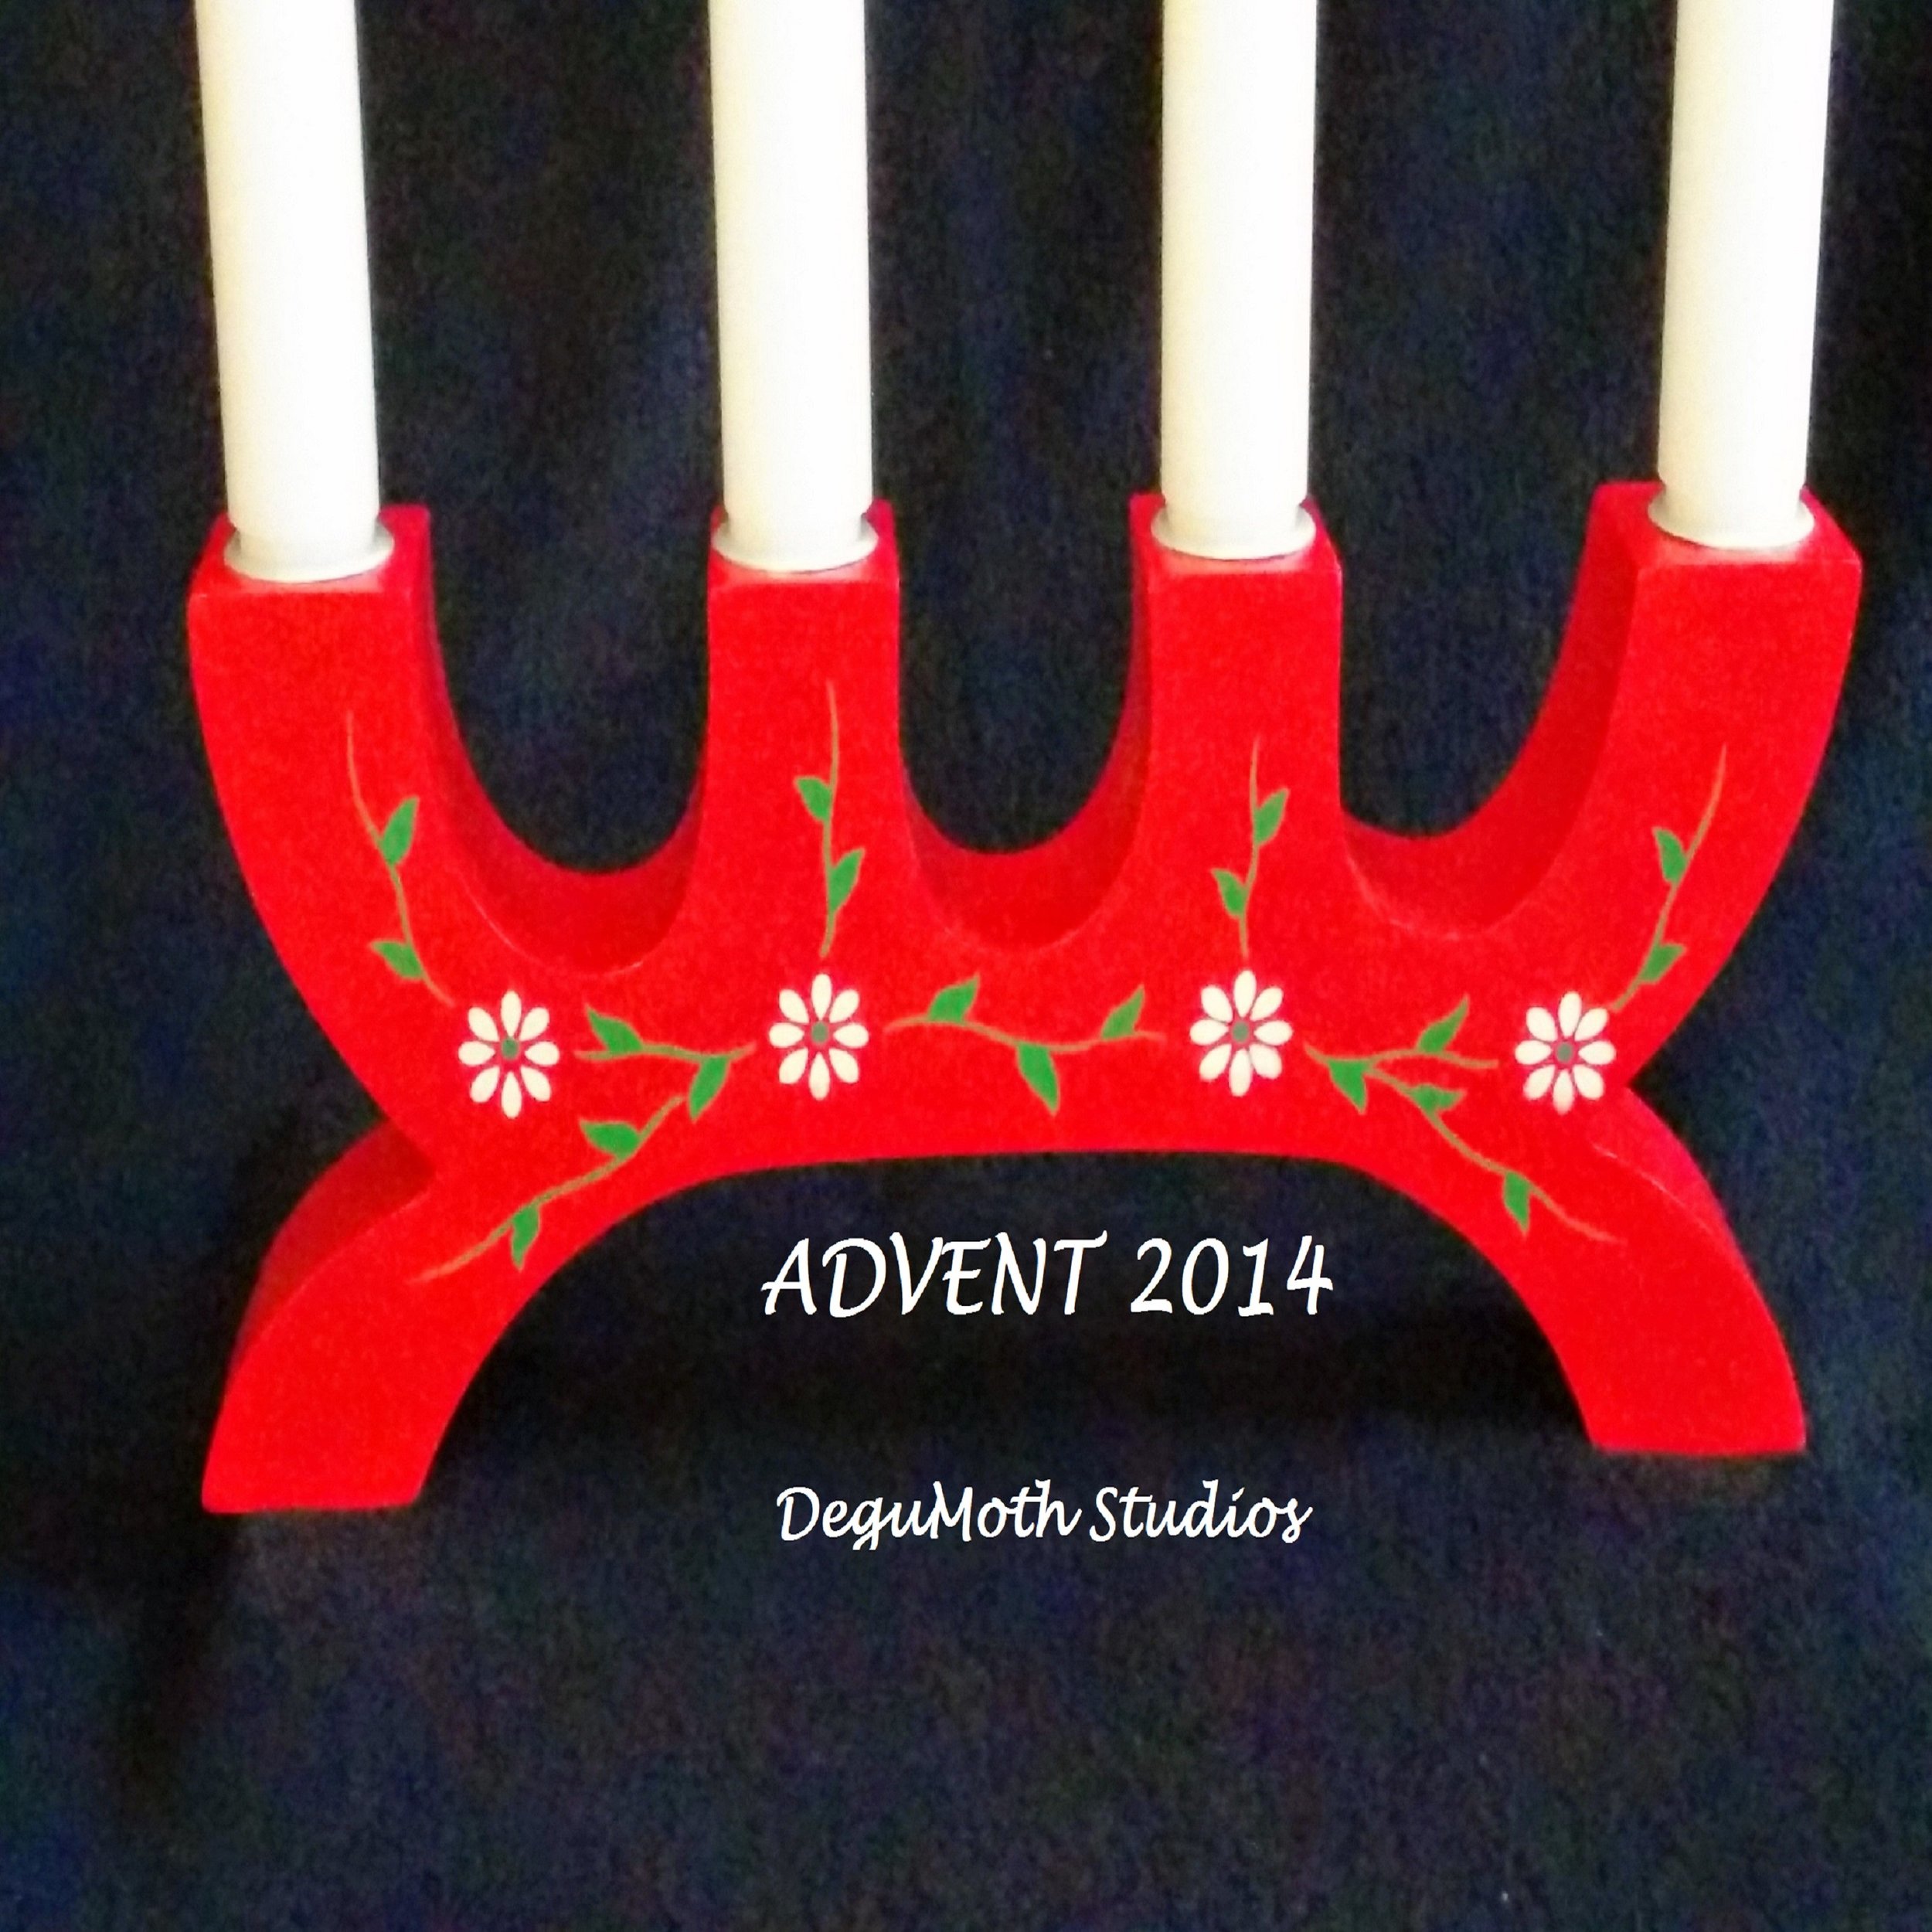 CandleholderAdvent(red)RESIZED for Loudr SQUARE.jpg